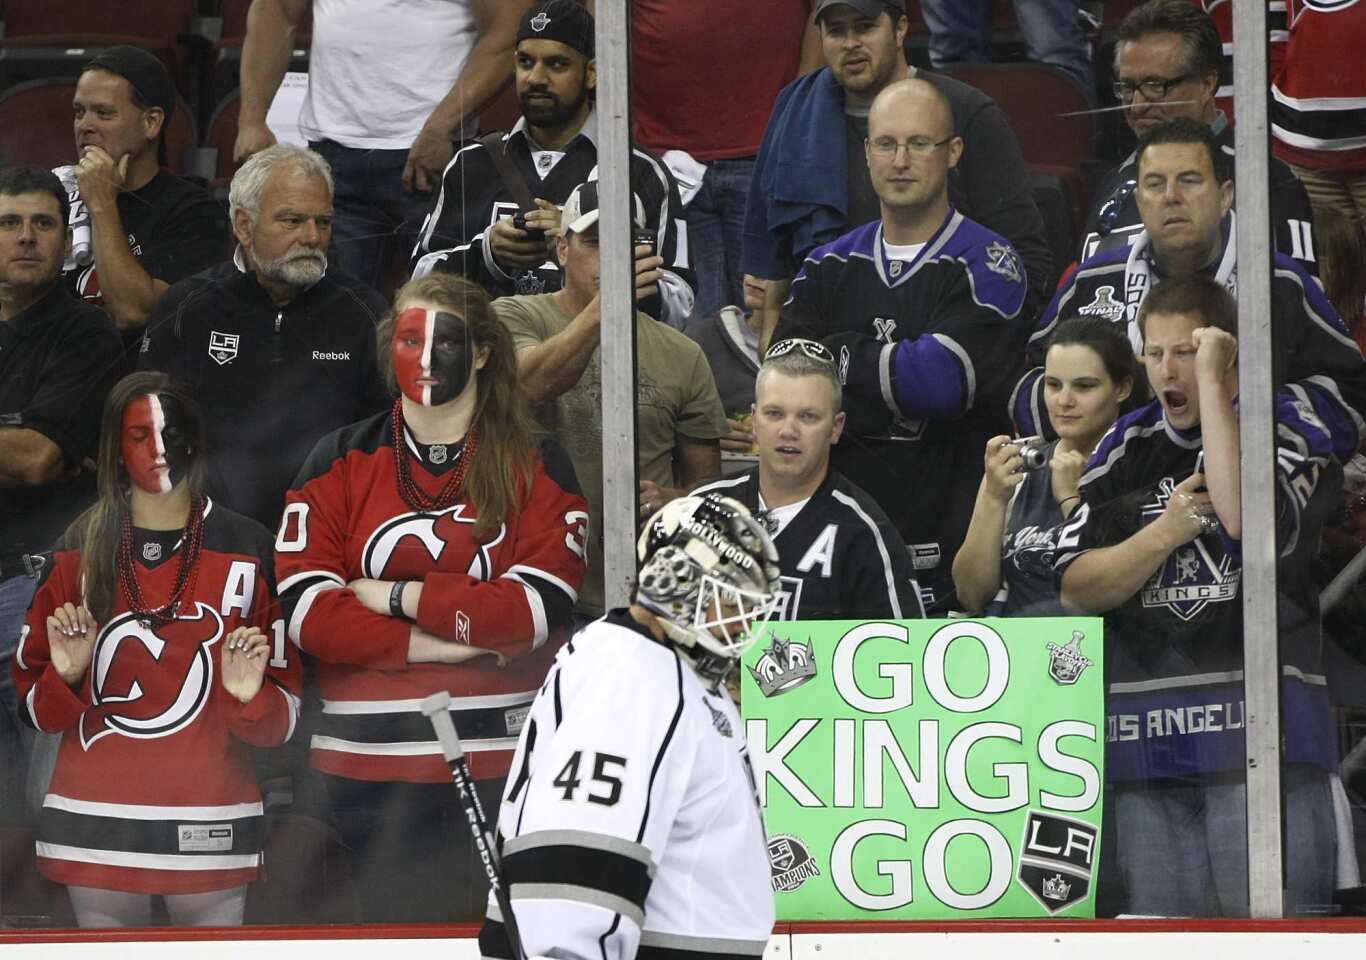 LA Kings one win from Stanley Cup after swamping New Jersey Devils, NHL